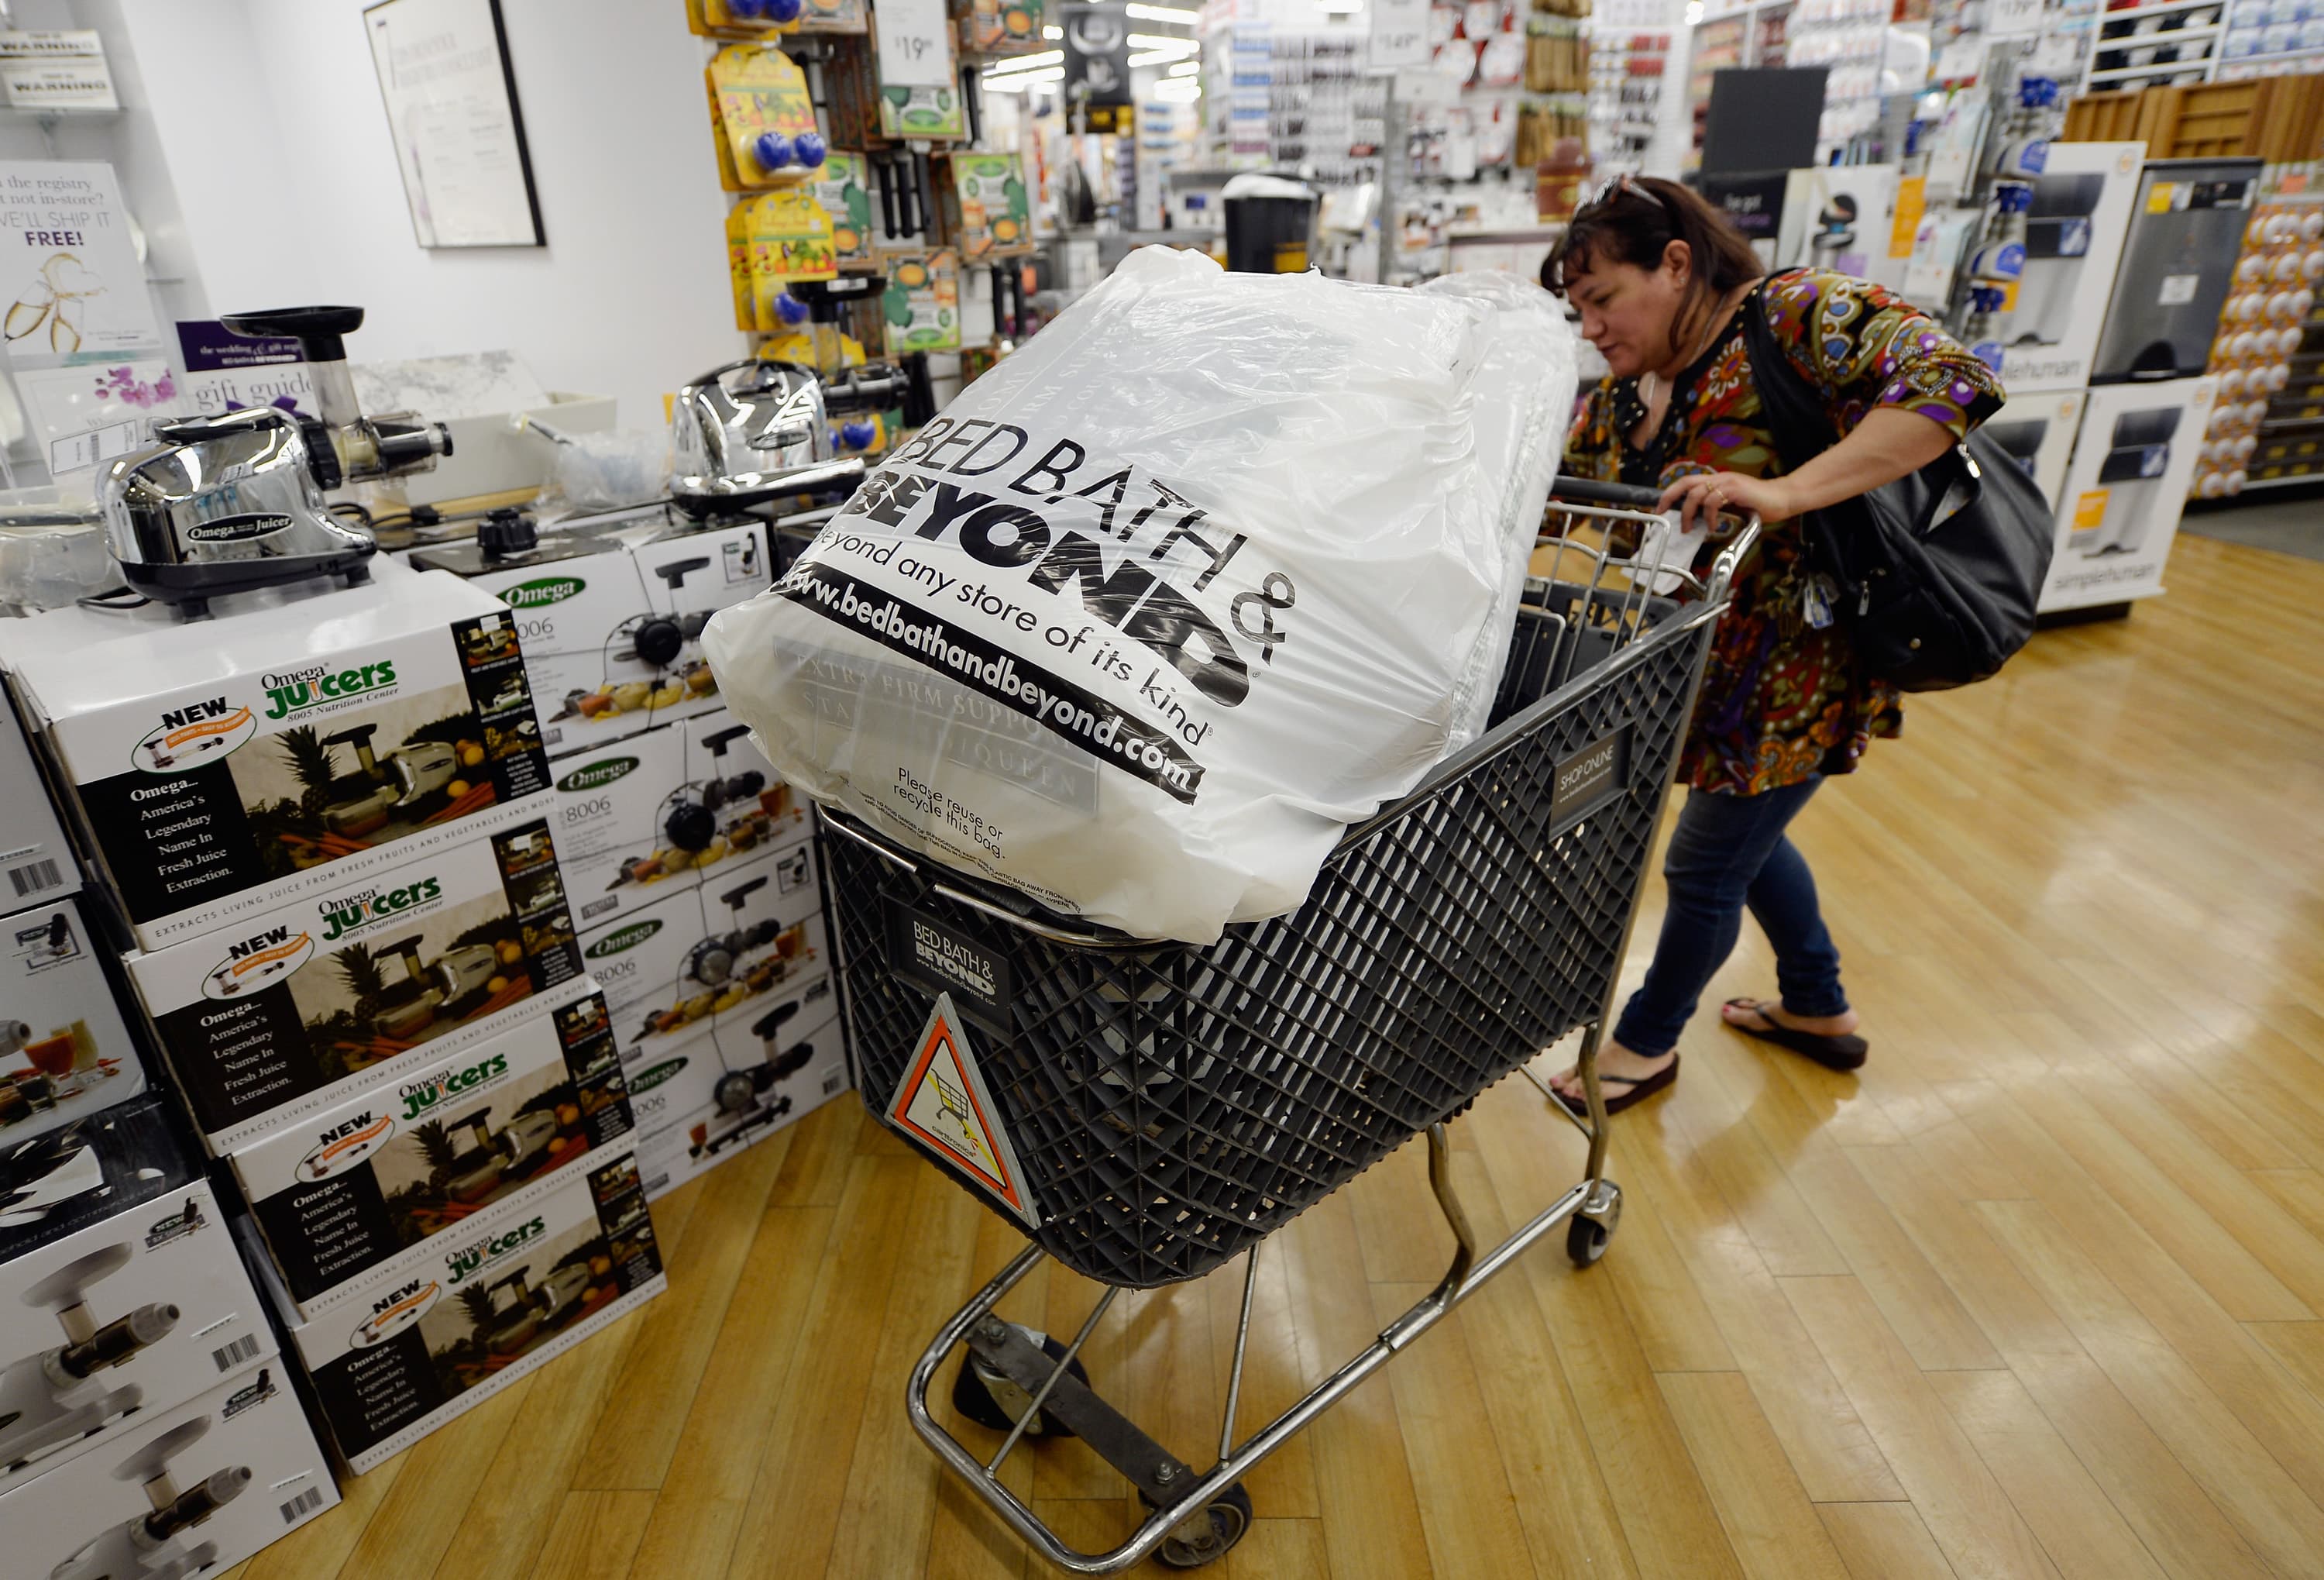 Raymond James downgrades Bed Bath & Beyond, says turnaround plan 'only kicks the can down the road'